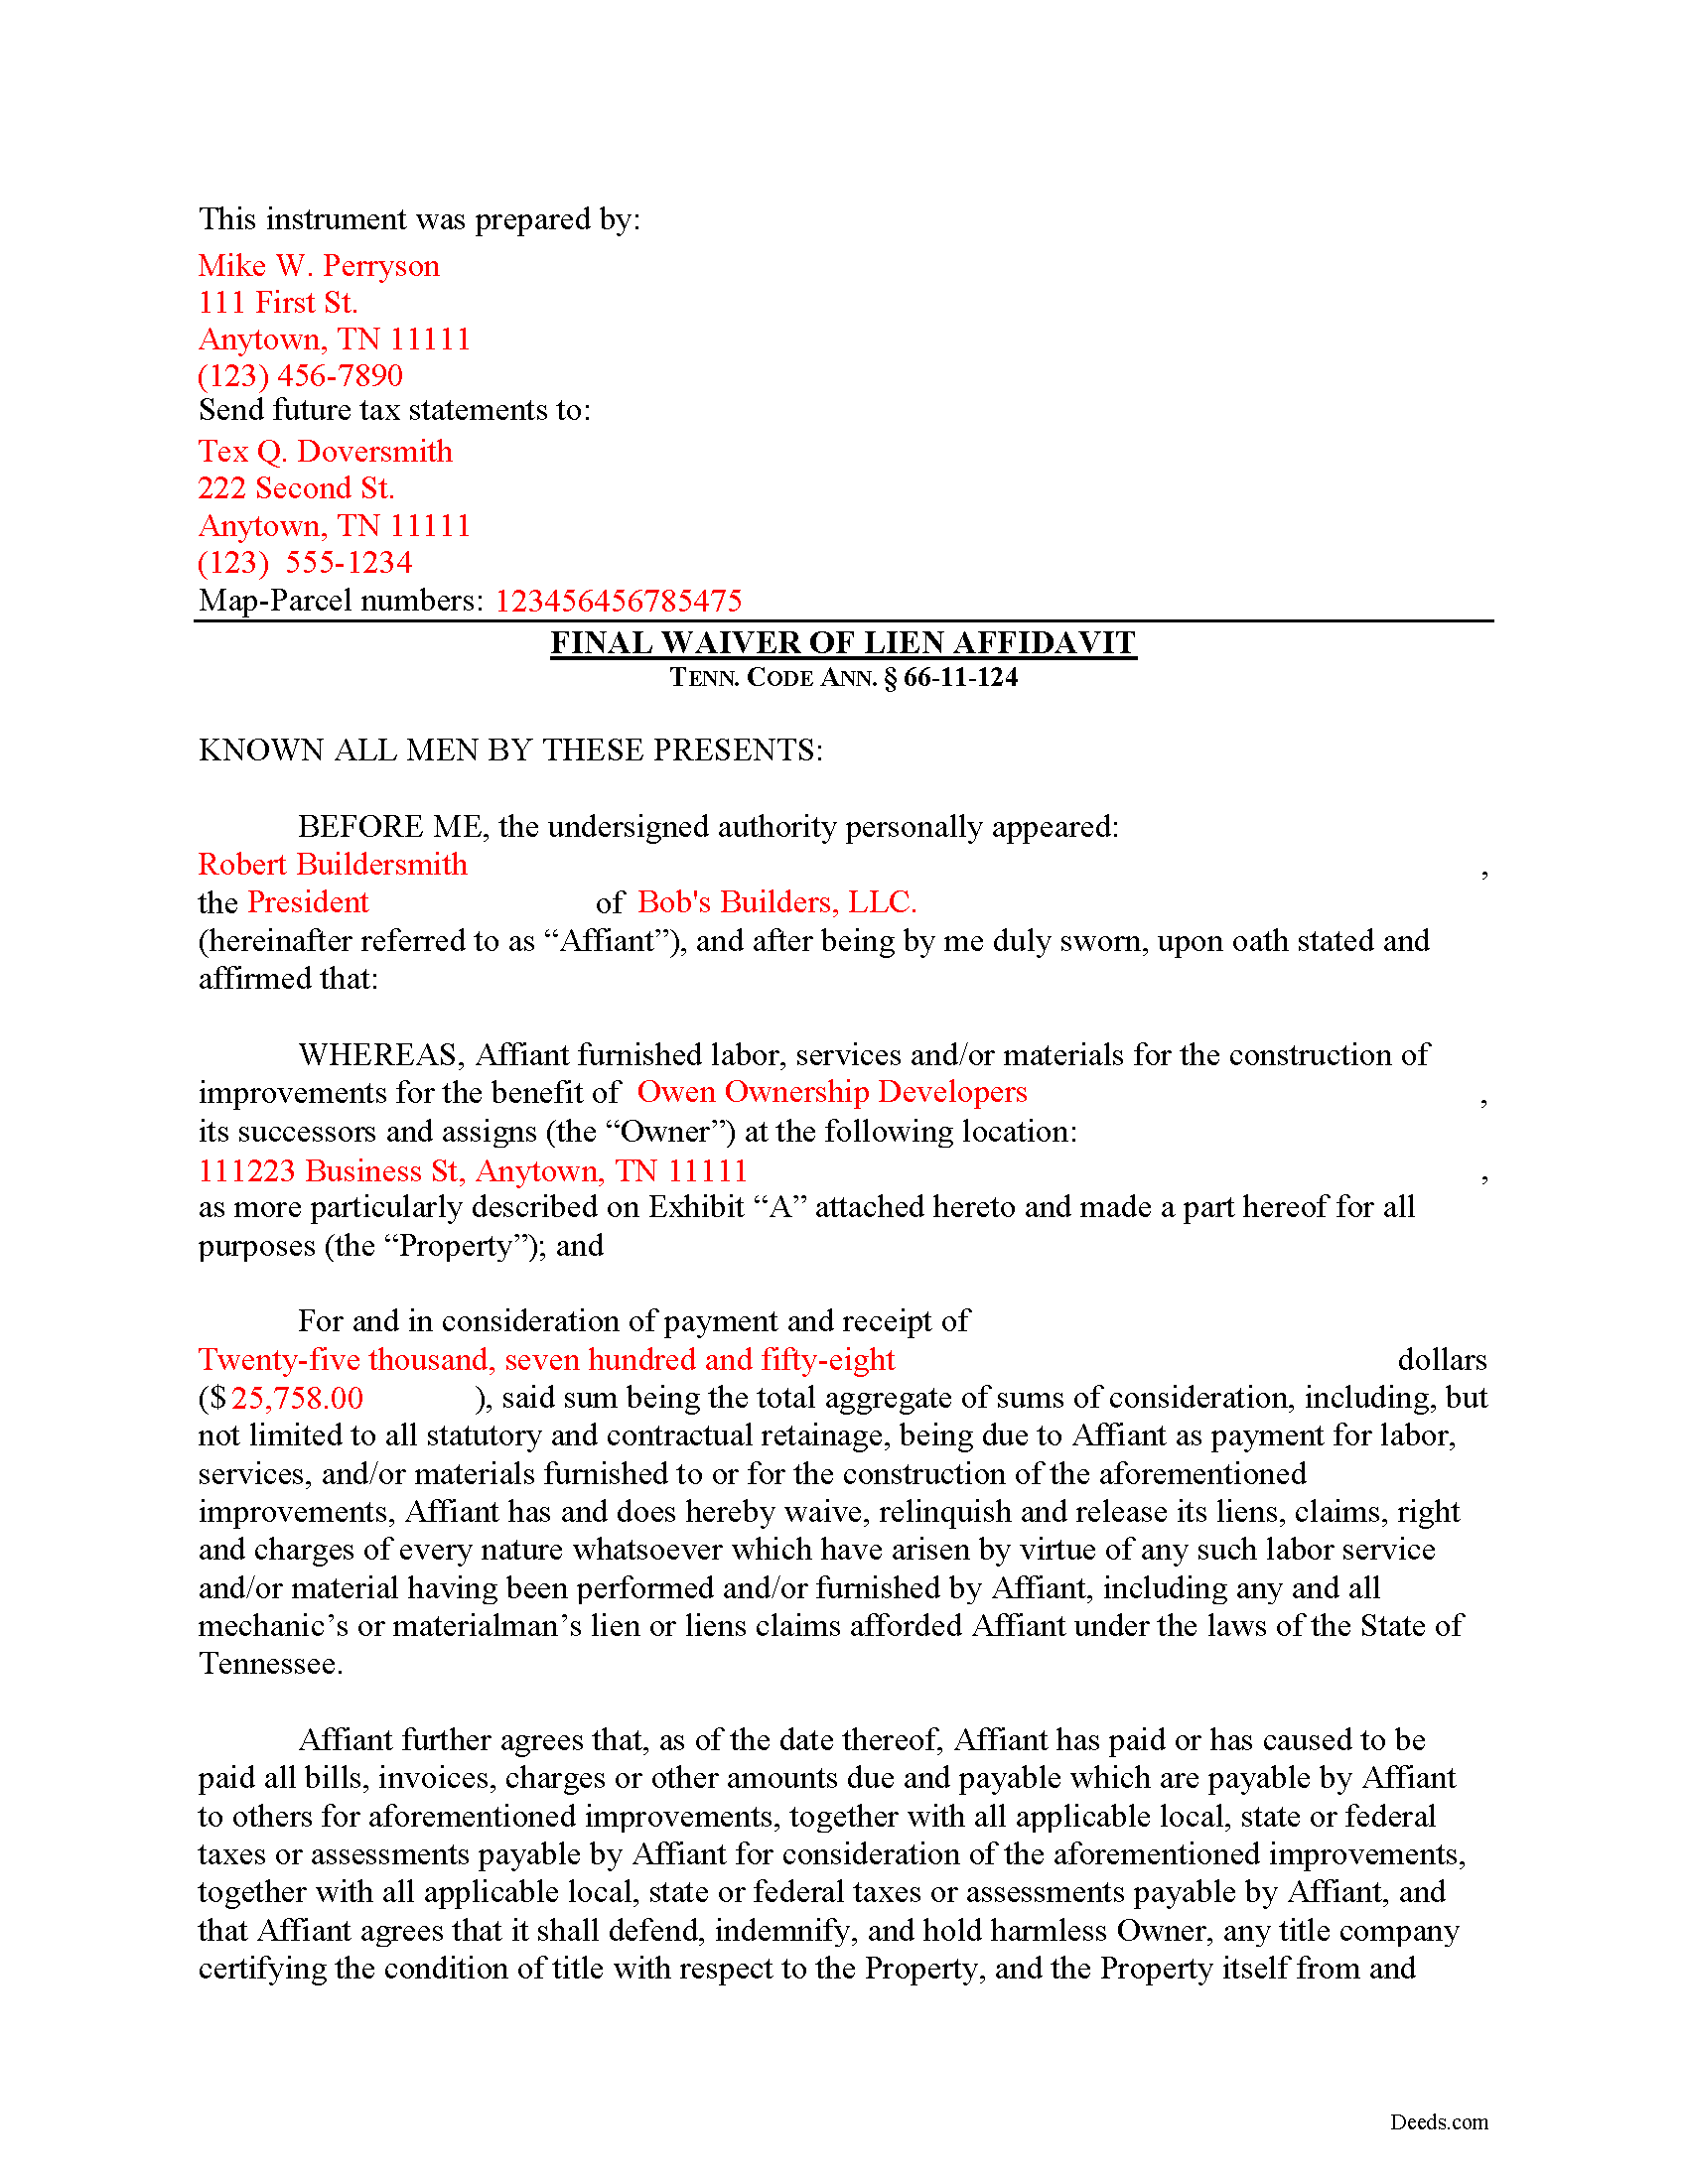 Completed Example of the Final Lien Waiver Document